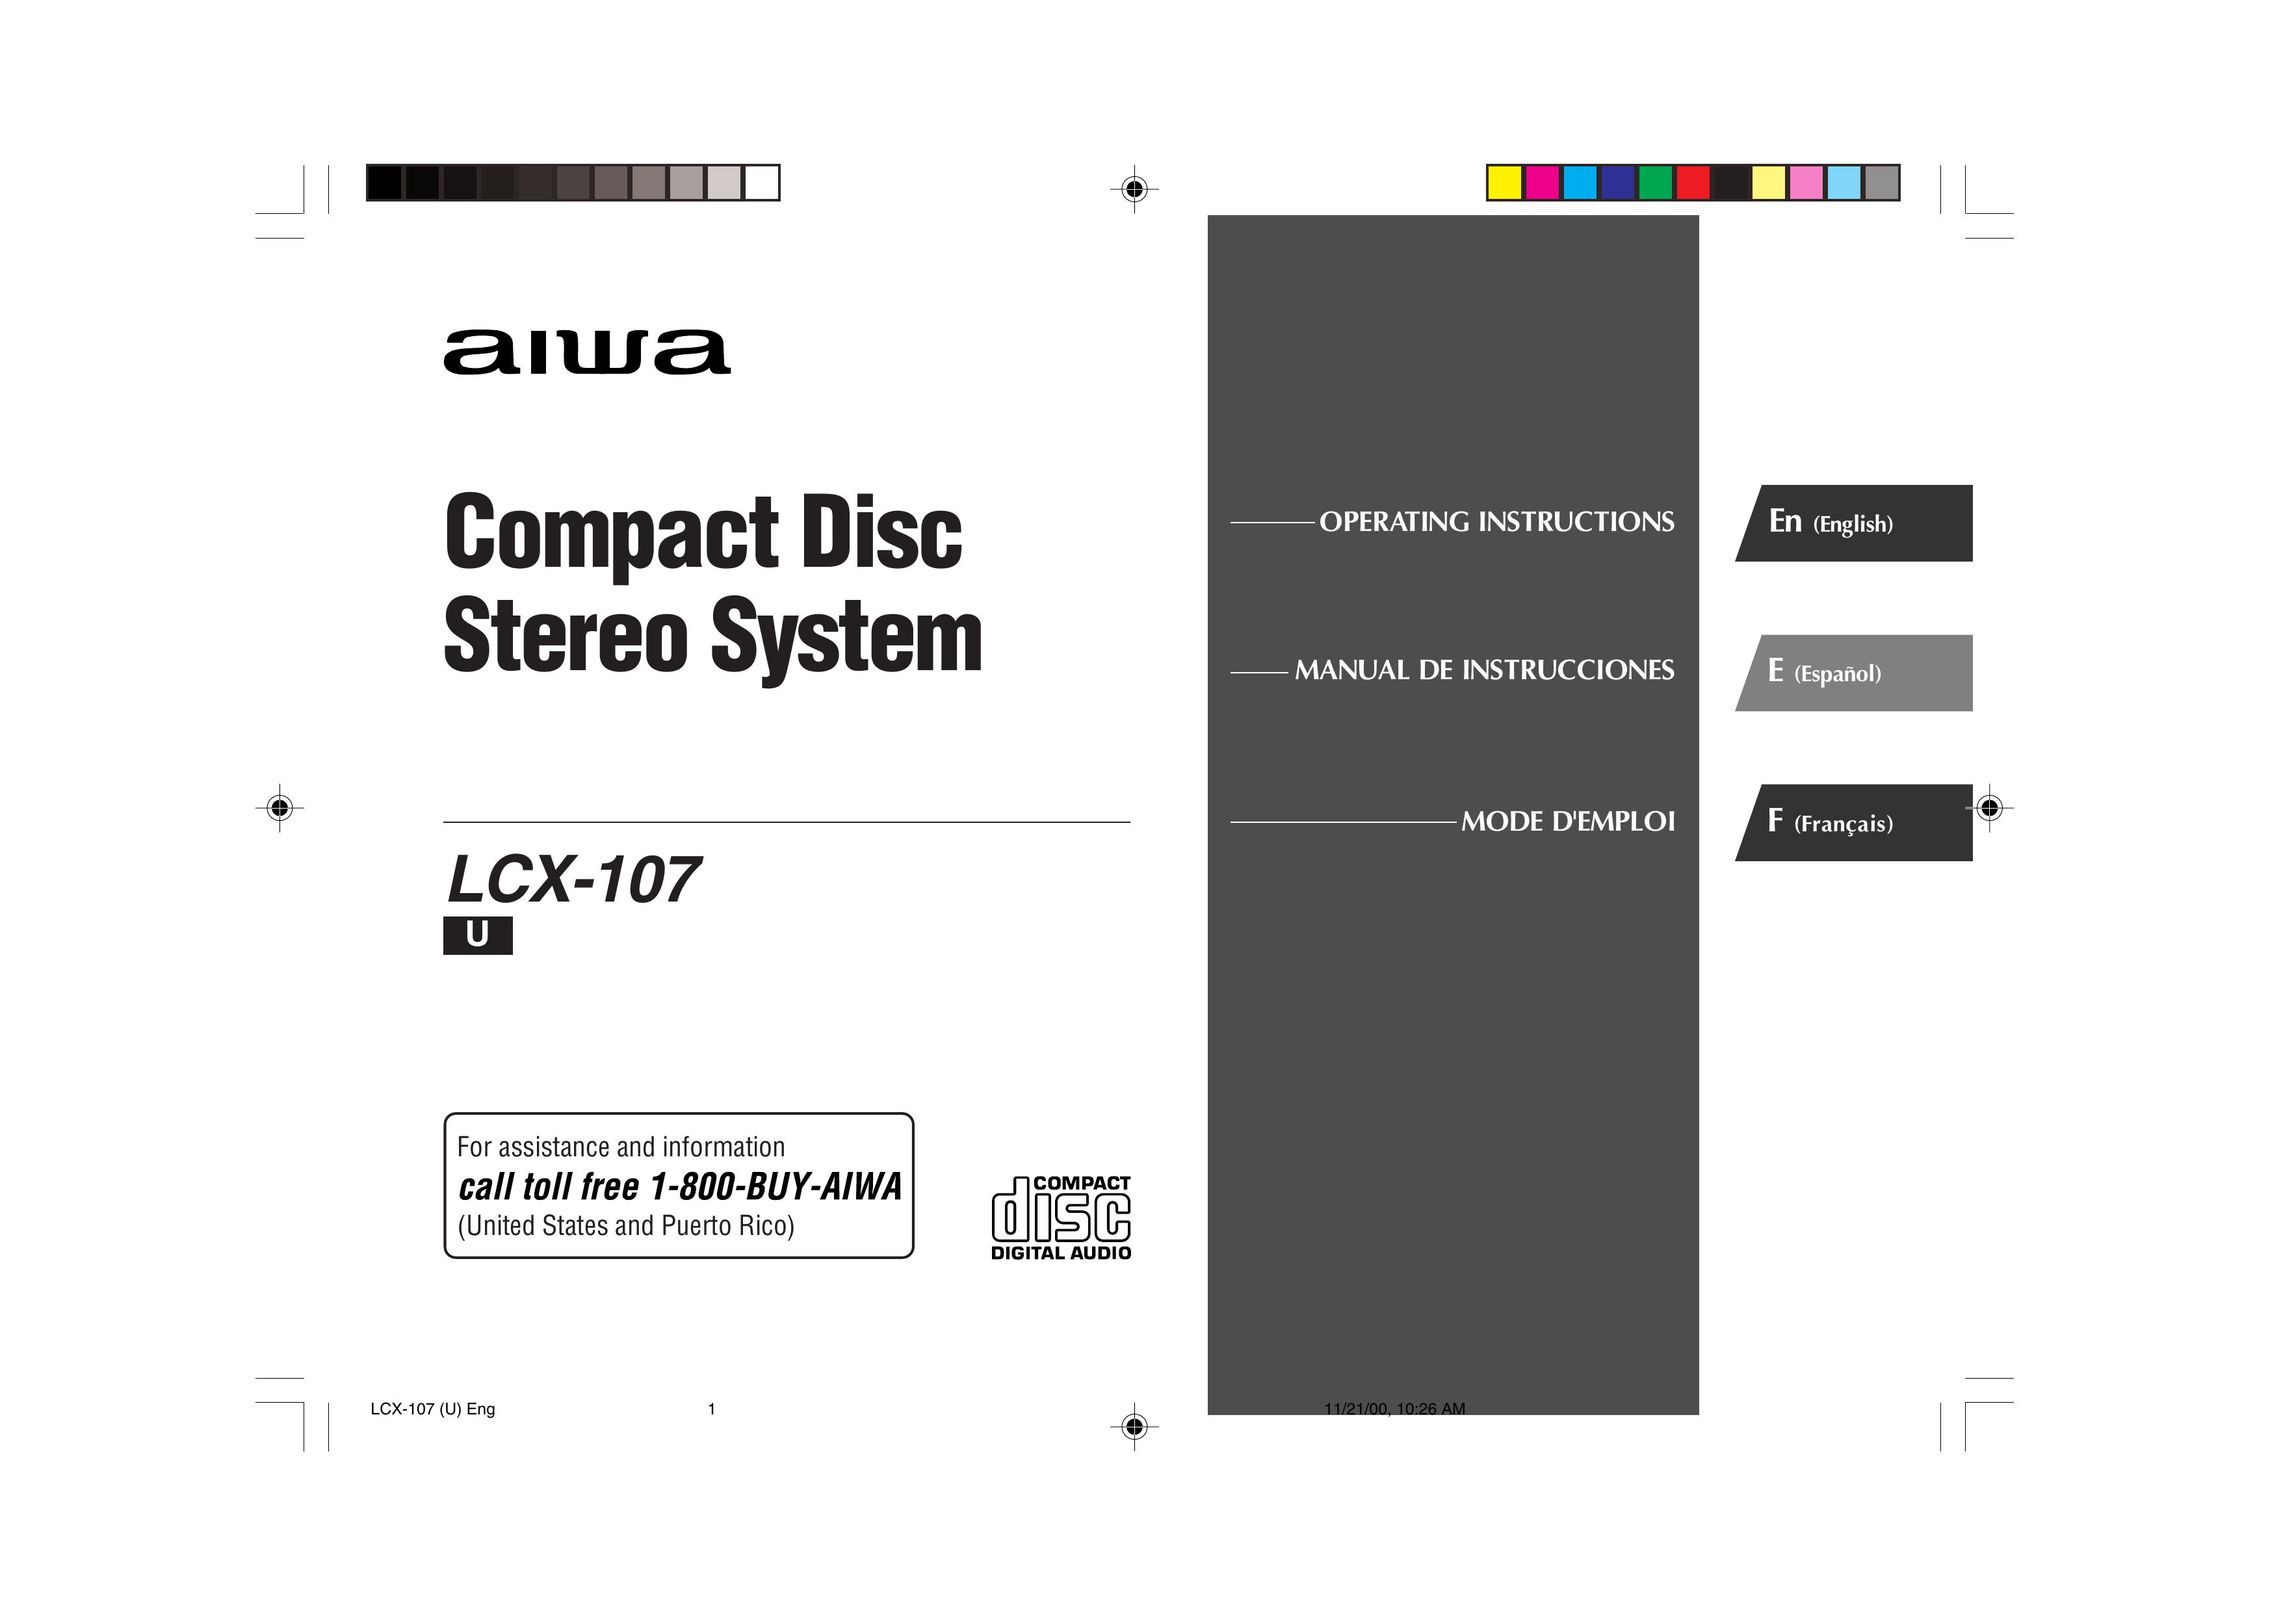 Aiwa LCX-107 Stereo System User Manual